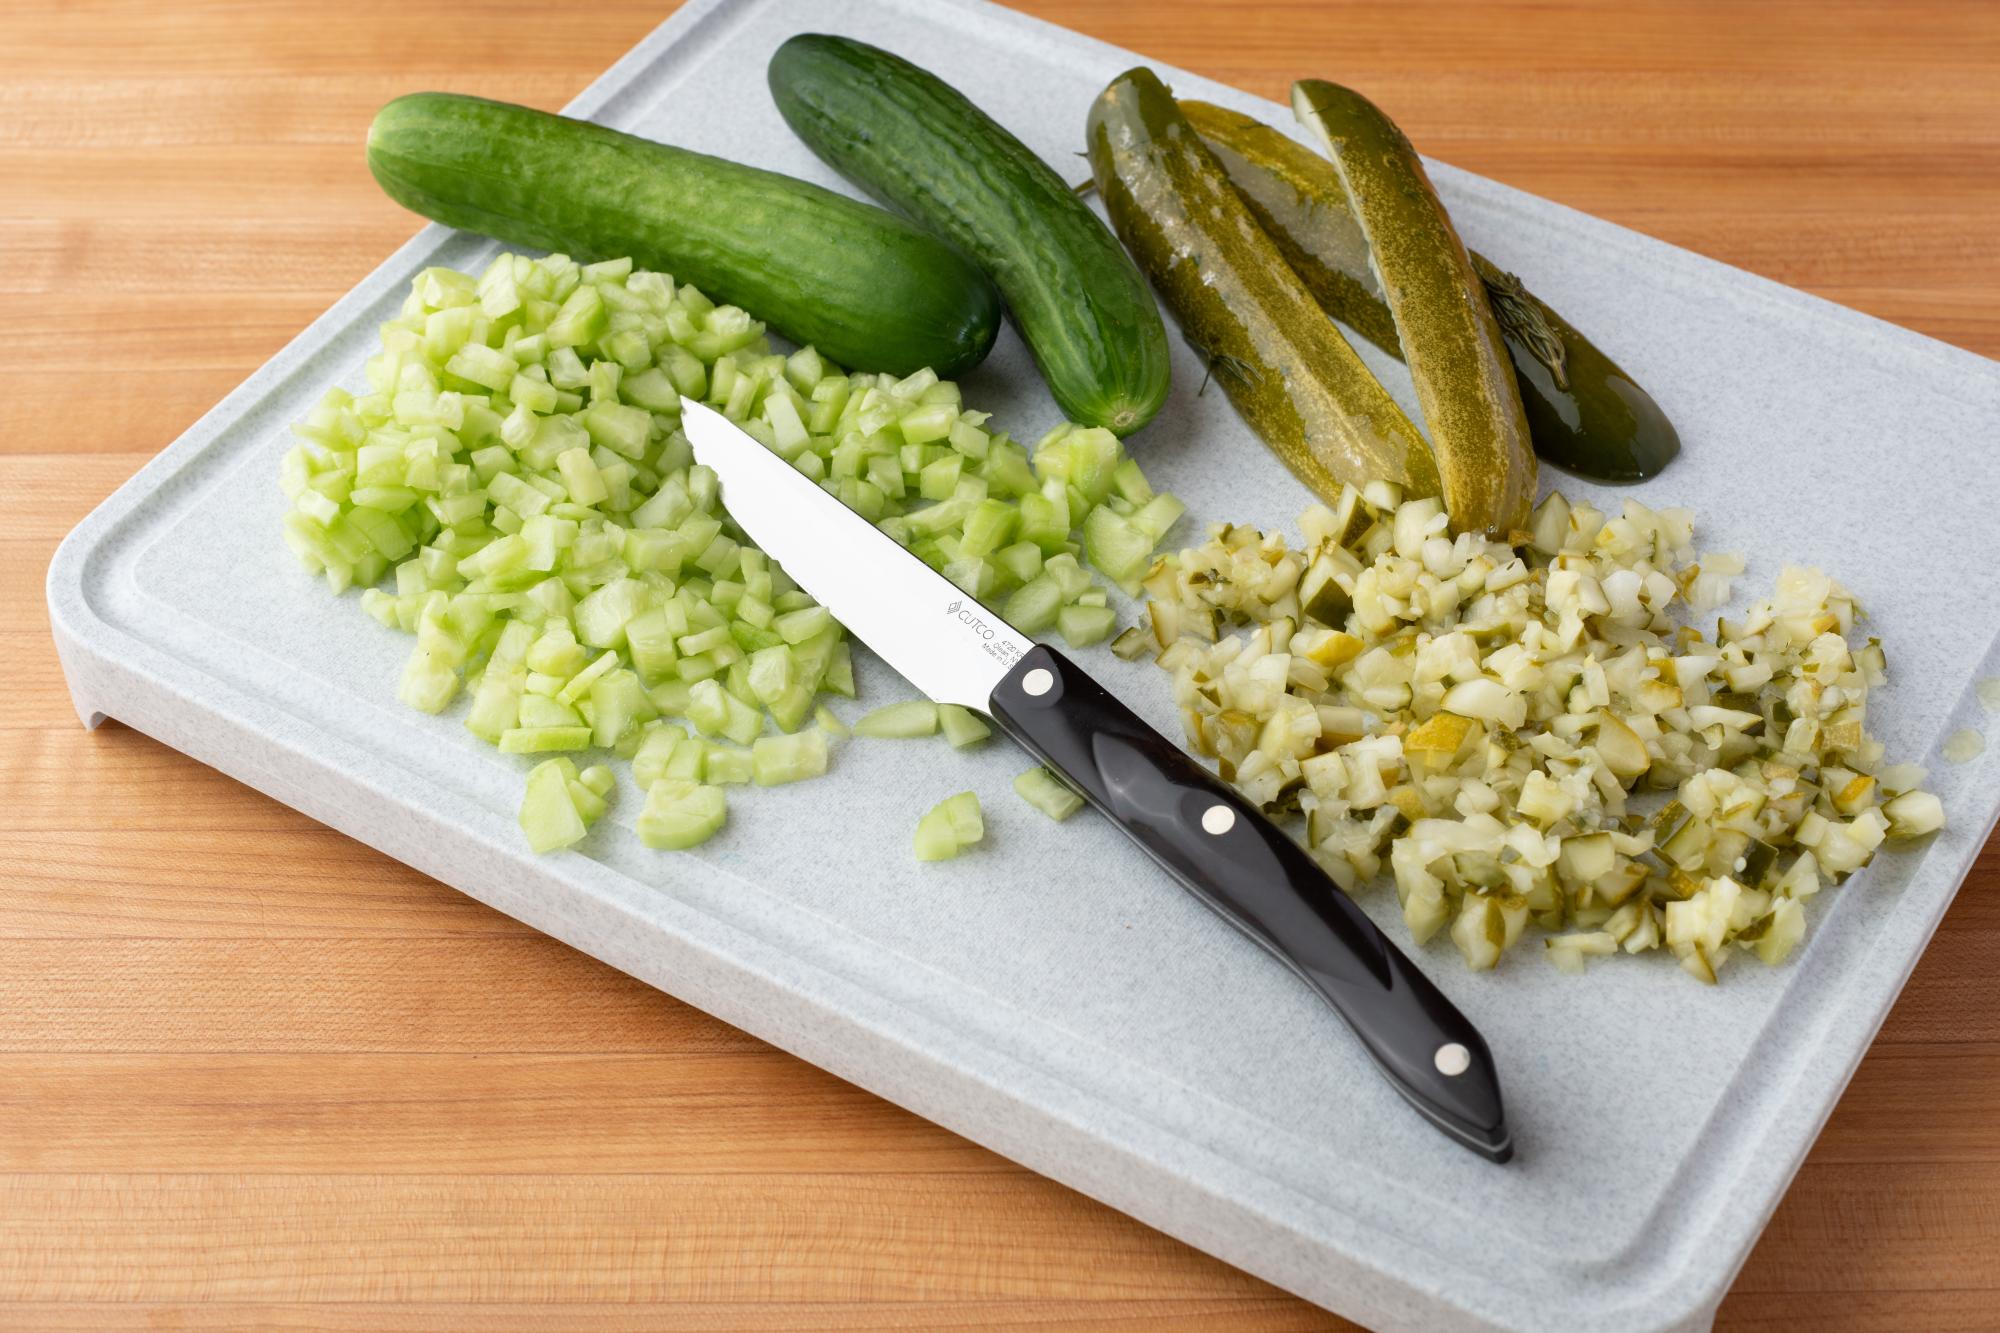 Diced pickle and cucumber with the 4 Inch Gourmet Paring Knife.